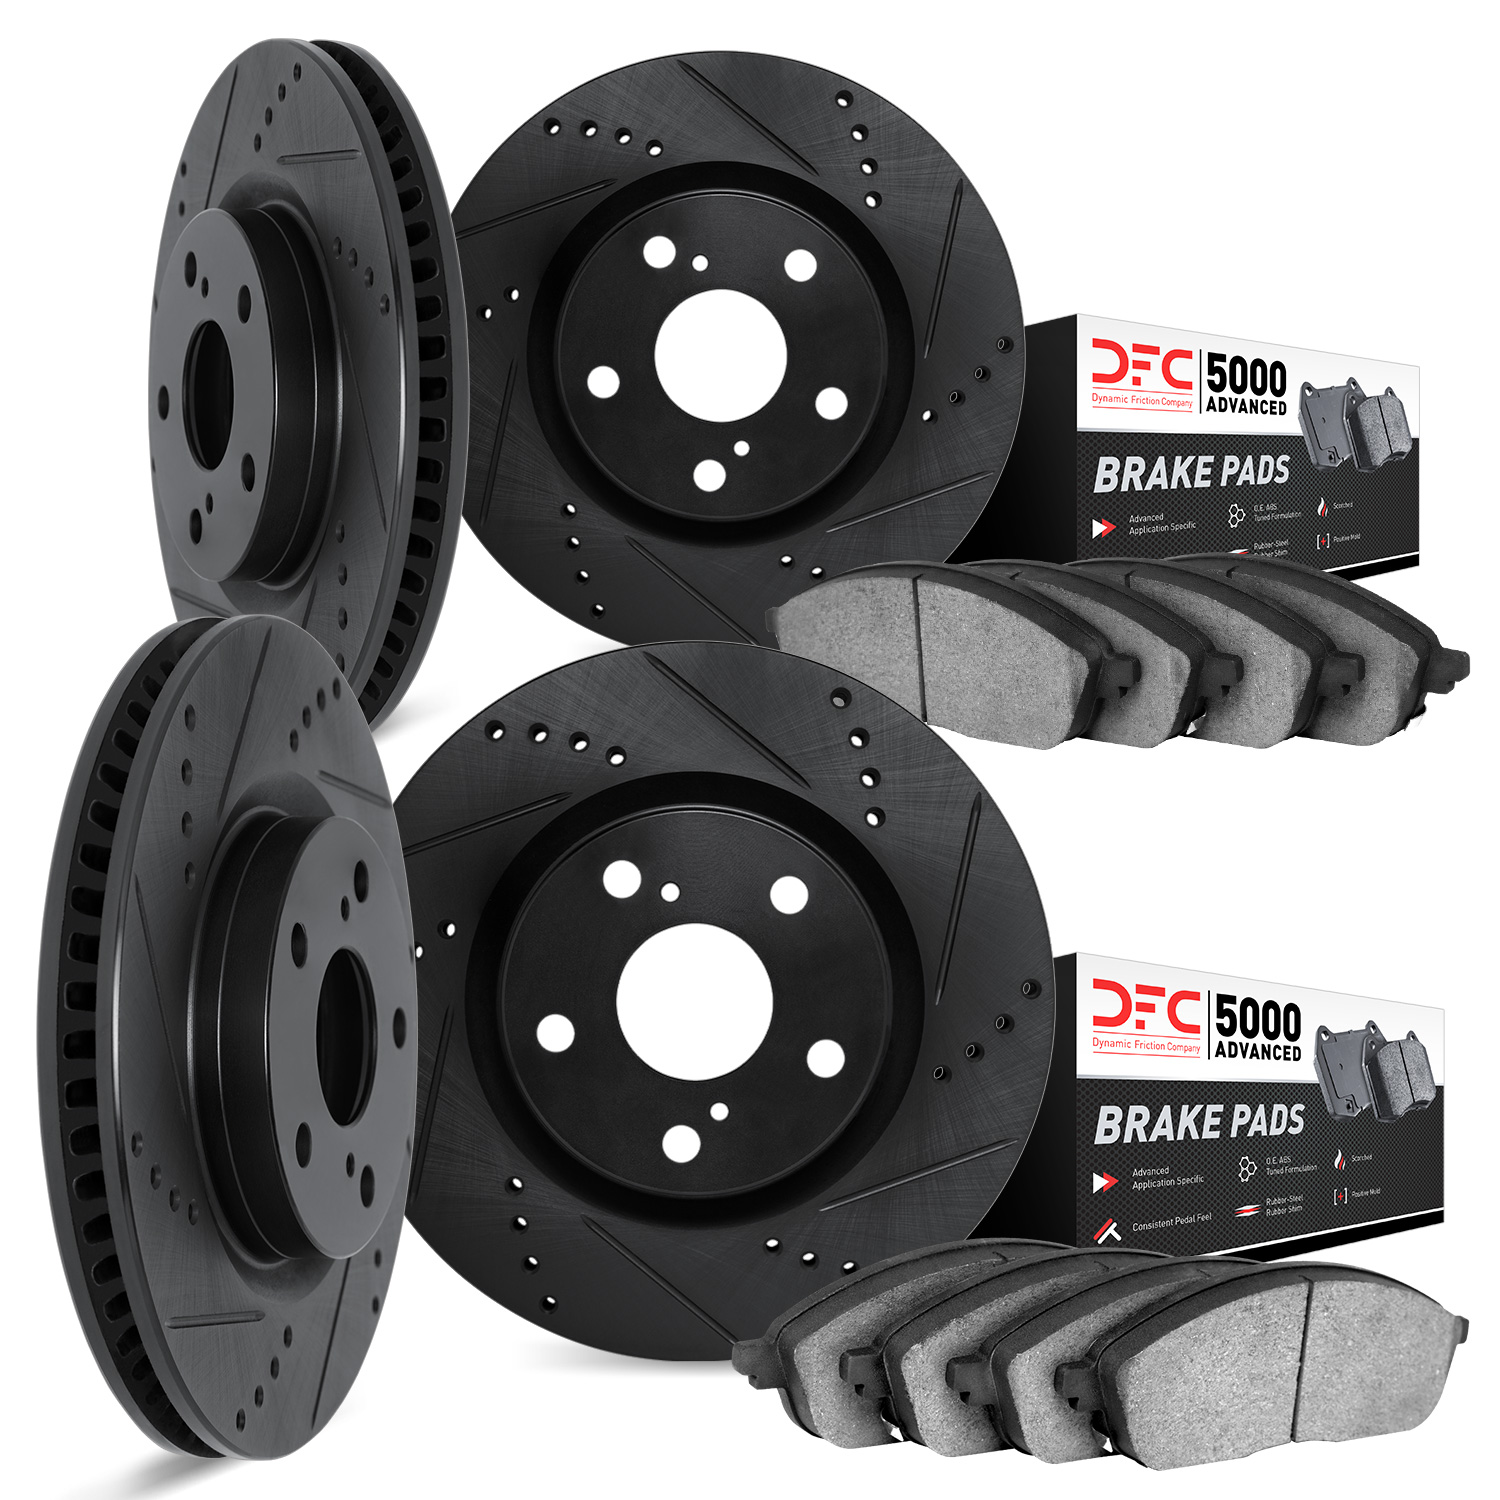 8504-13010 Drilled/Slotted Brake Rotors w/5000 Advanced Brake Pads Kit [Black], 2010-2014 Subaru, Position: Front and Rear